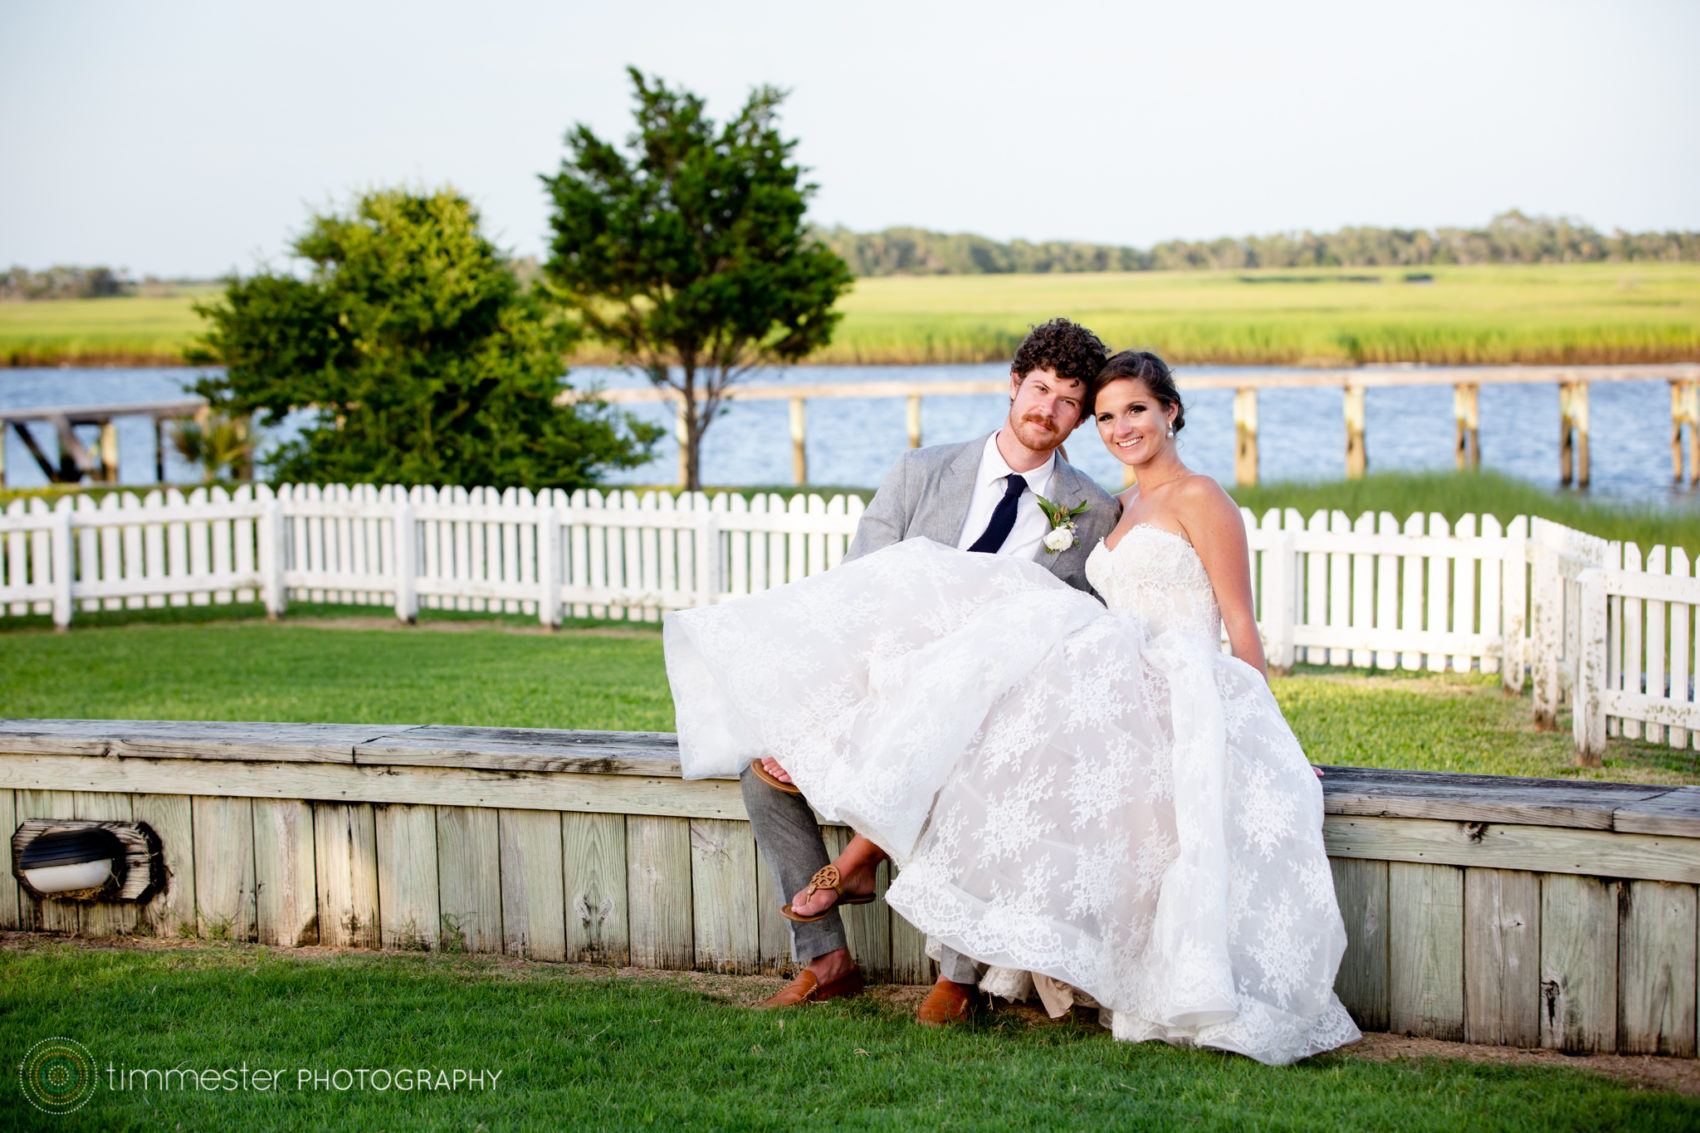 A Bald Head Island wedding with a beach ceremony and outdoor reception